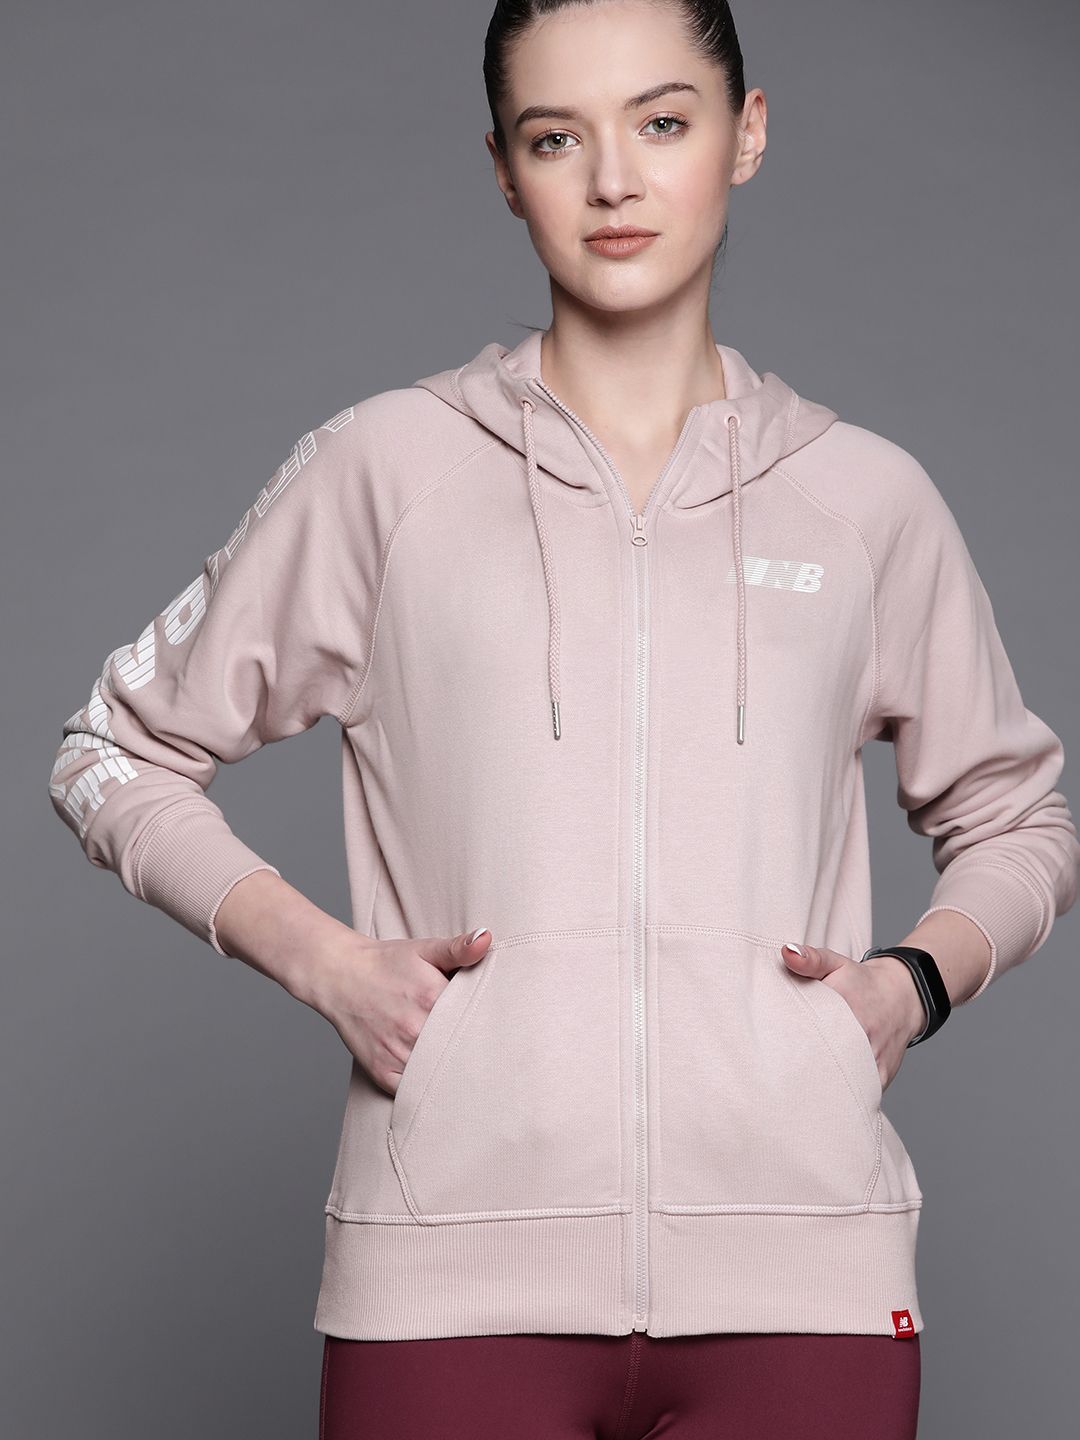 New Balance Women Pink Pure Cotton Brand Logo Printed Tailored Jacket Price in India